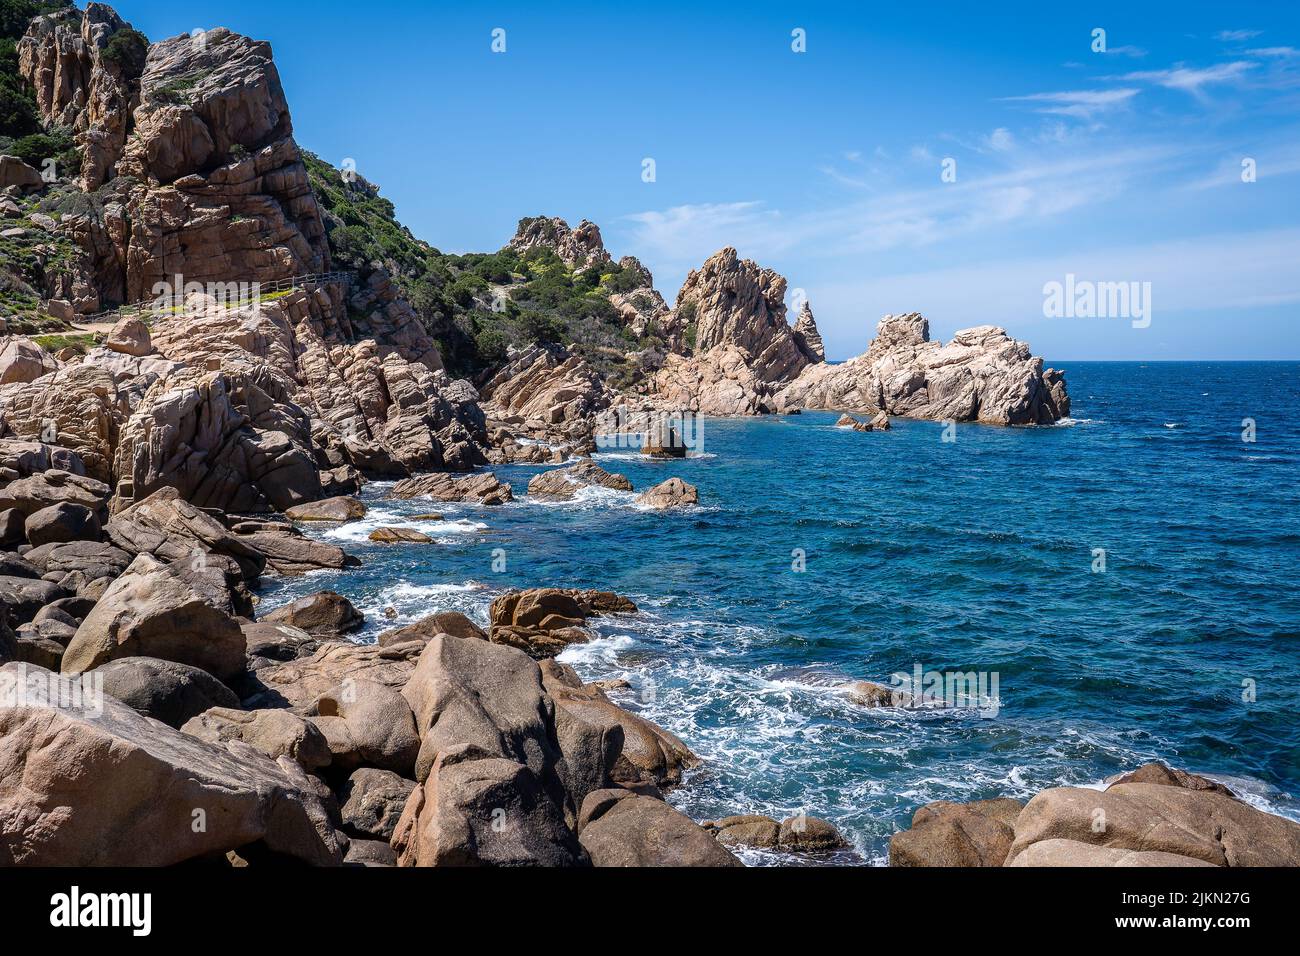 A rocky beach with clear blue water in Sardegna, Italy Stock Photo